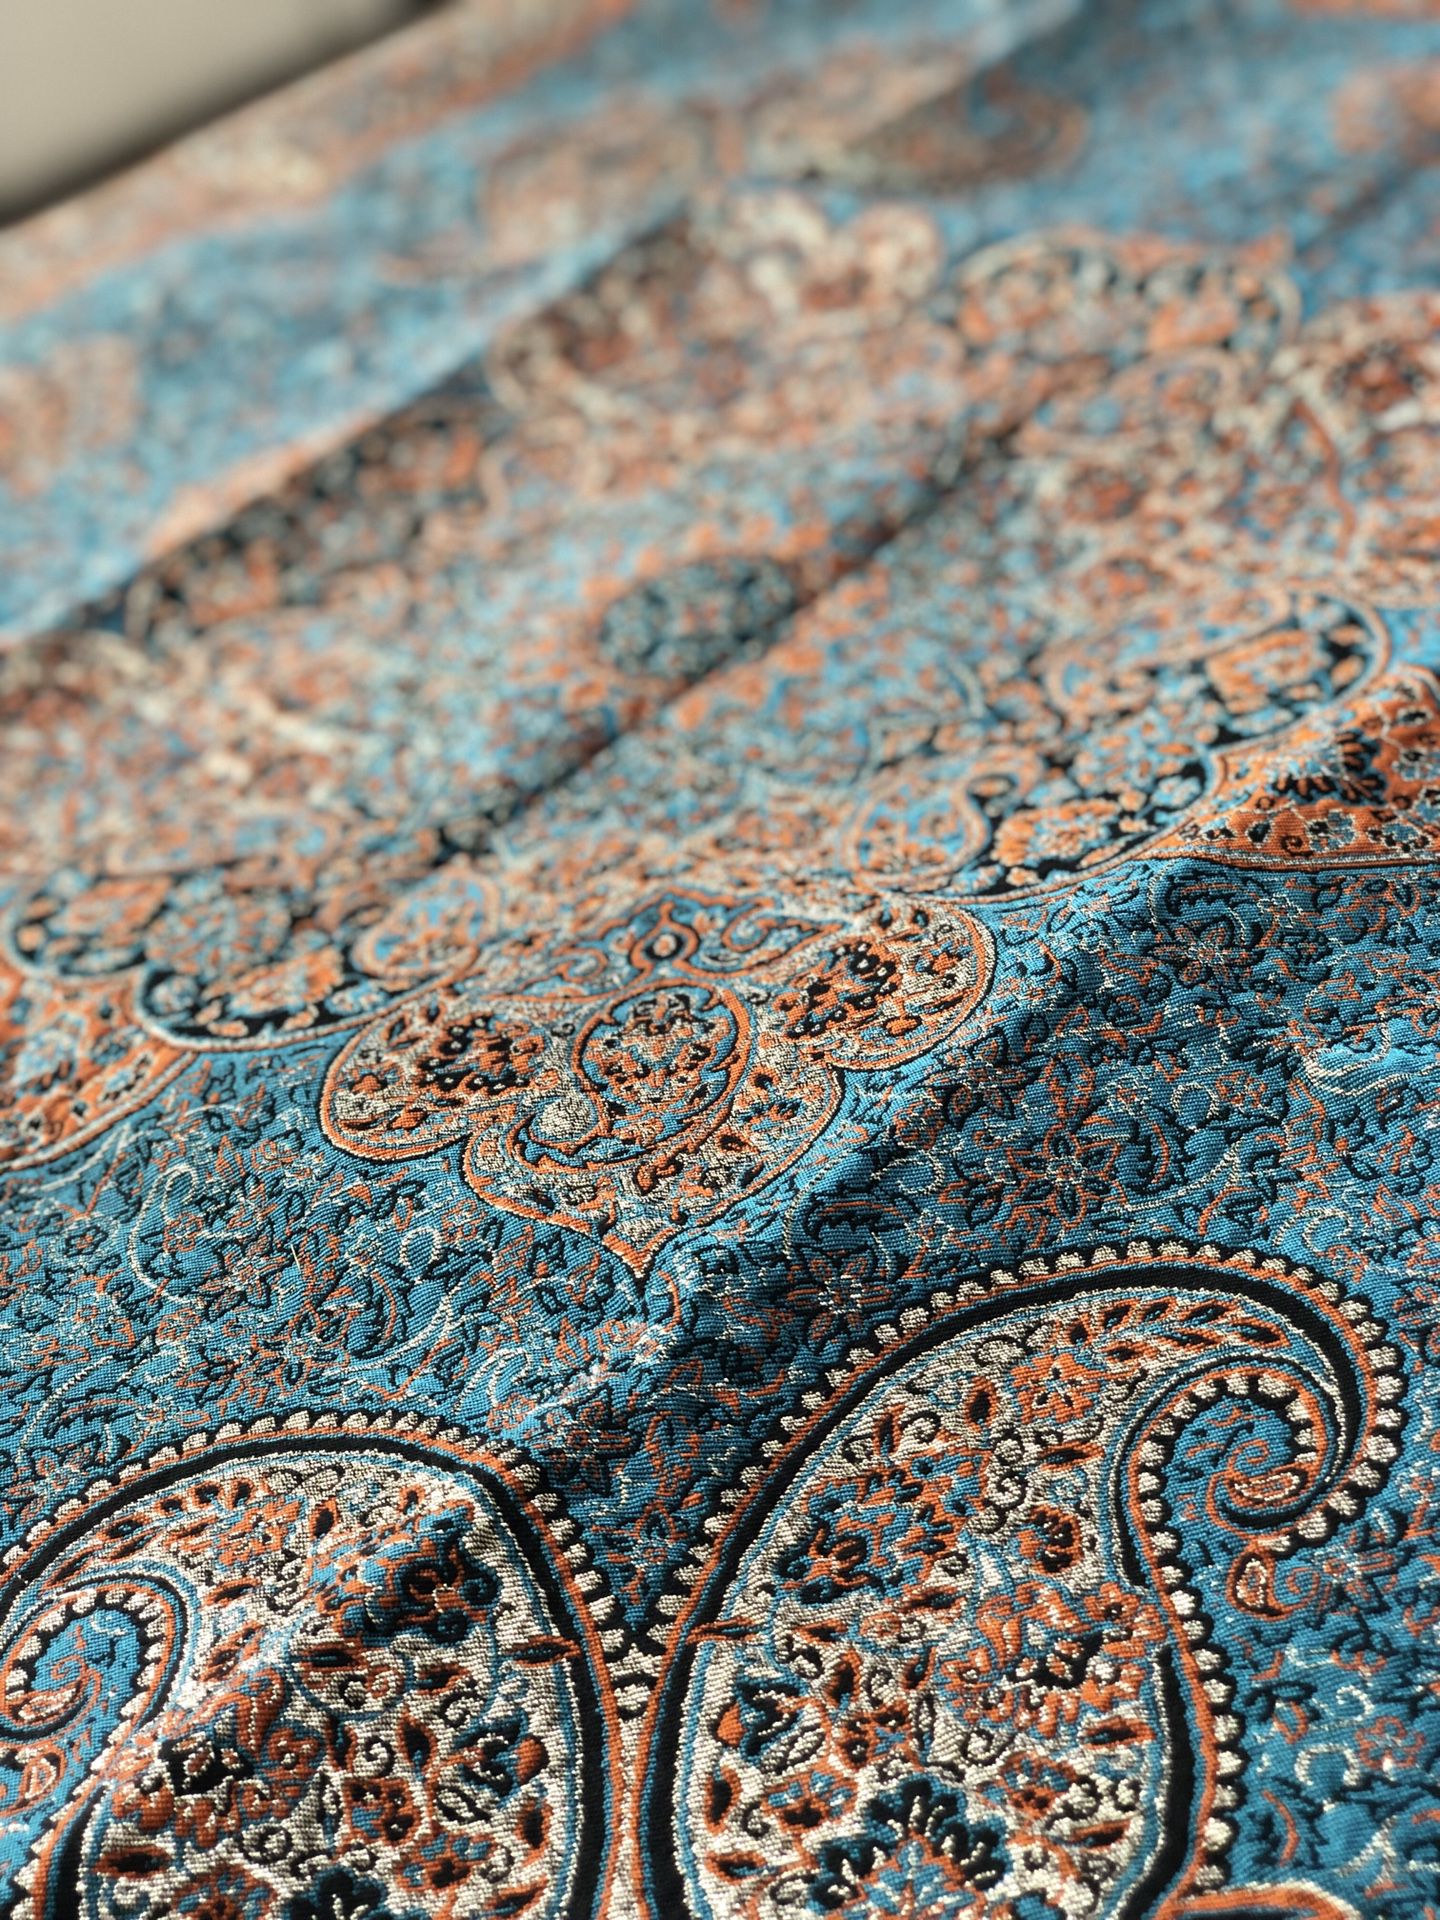 Elegant blue and gold table cover with many details